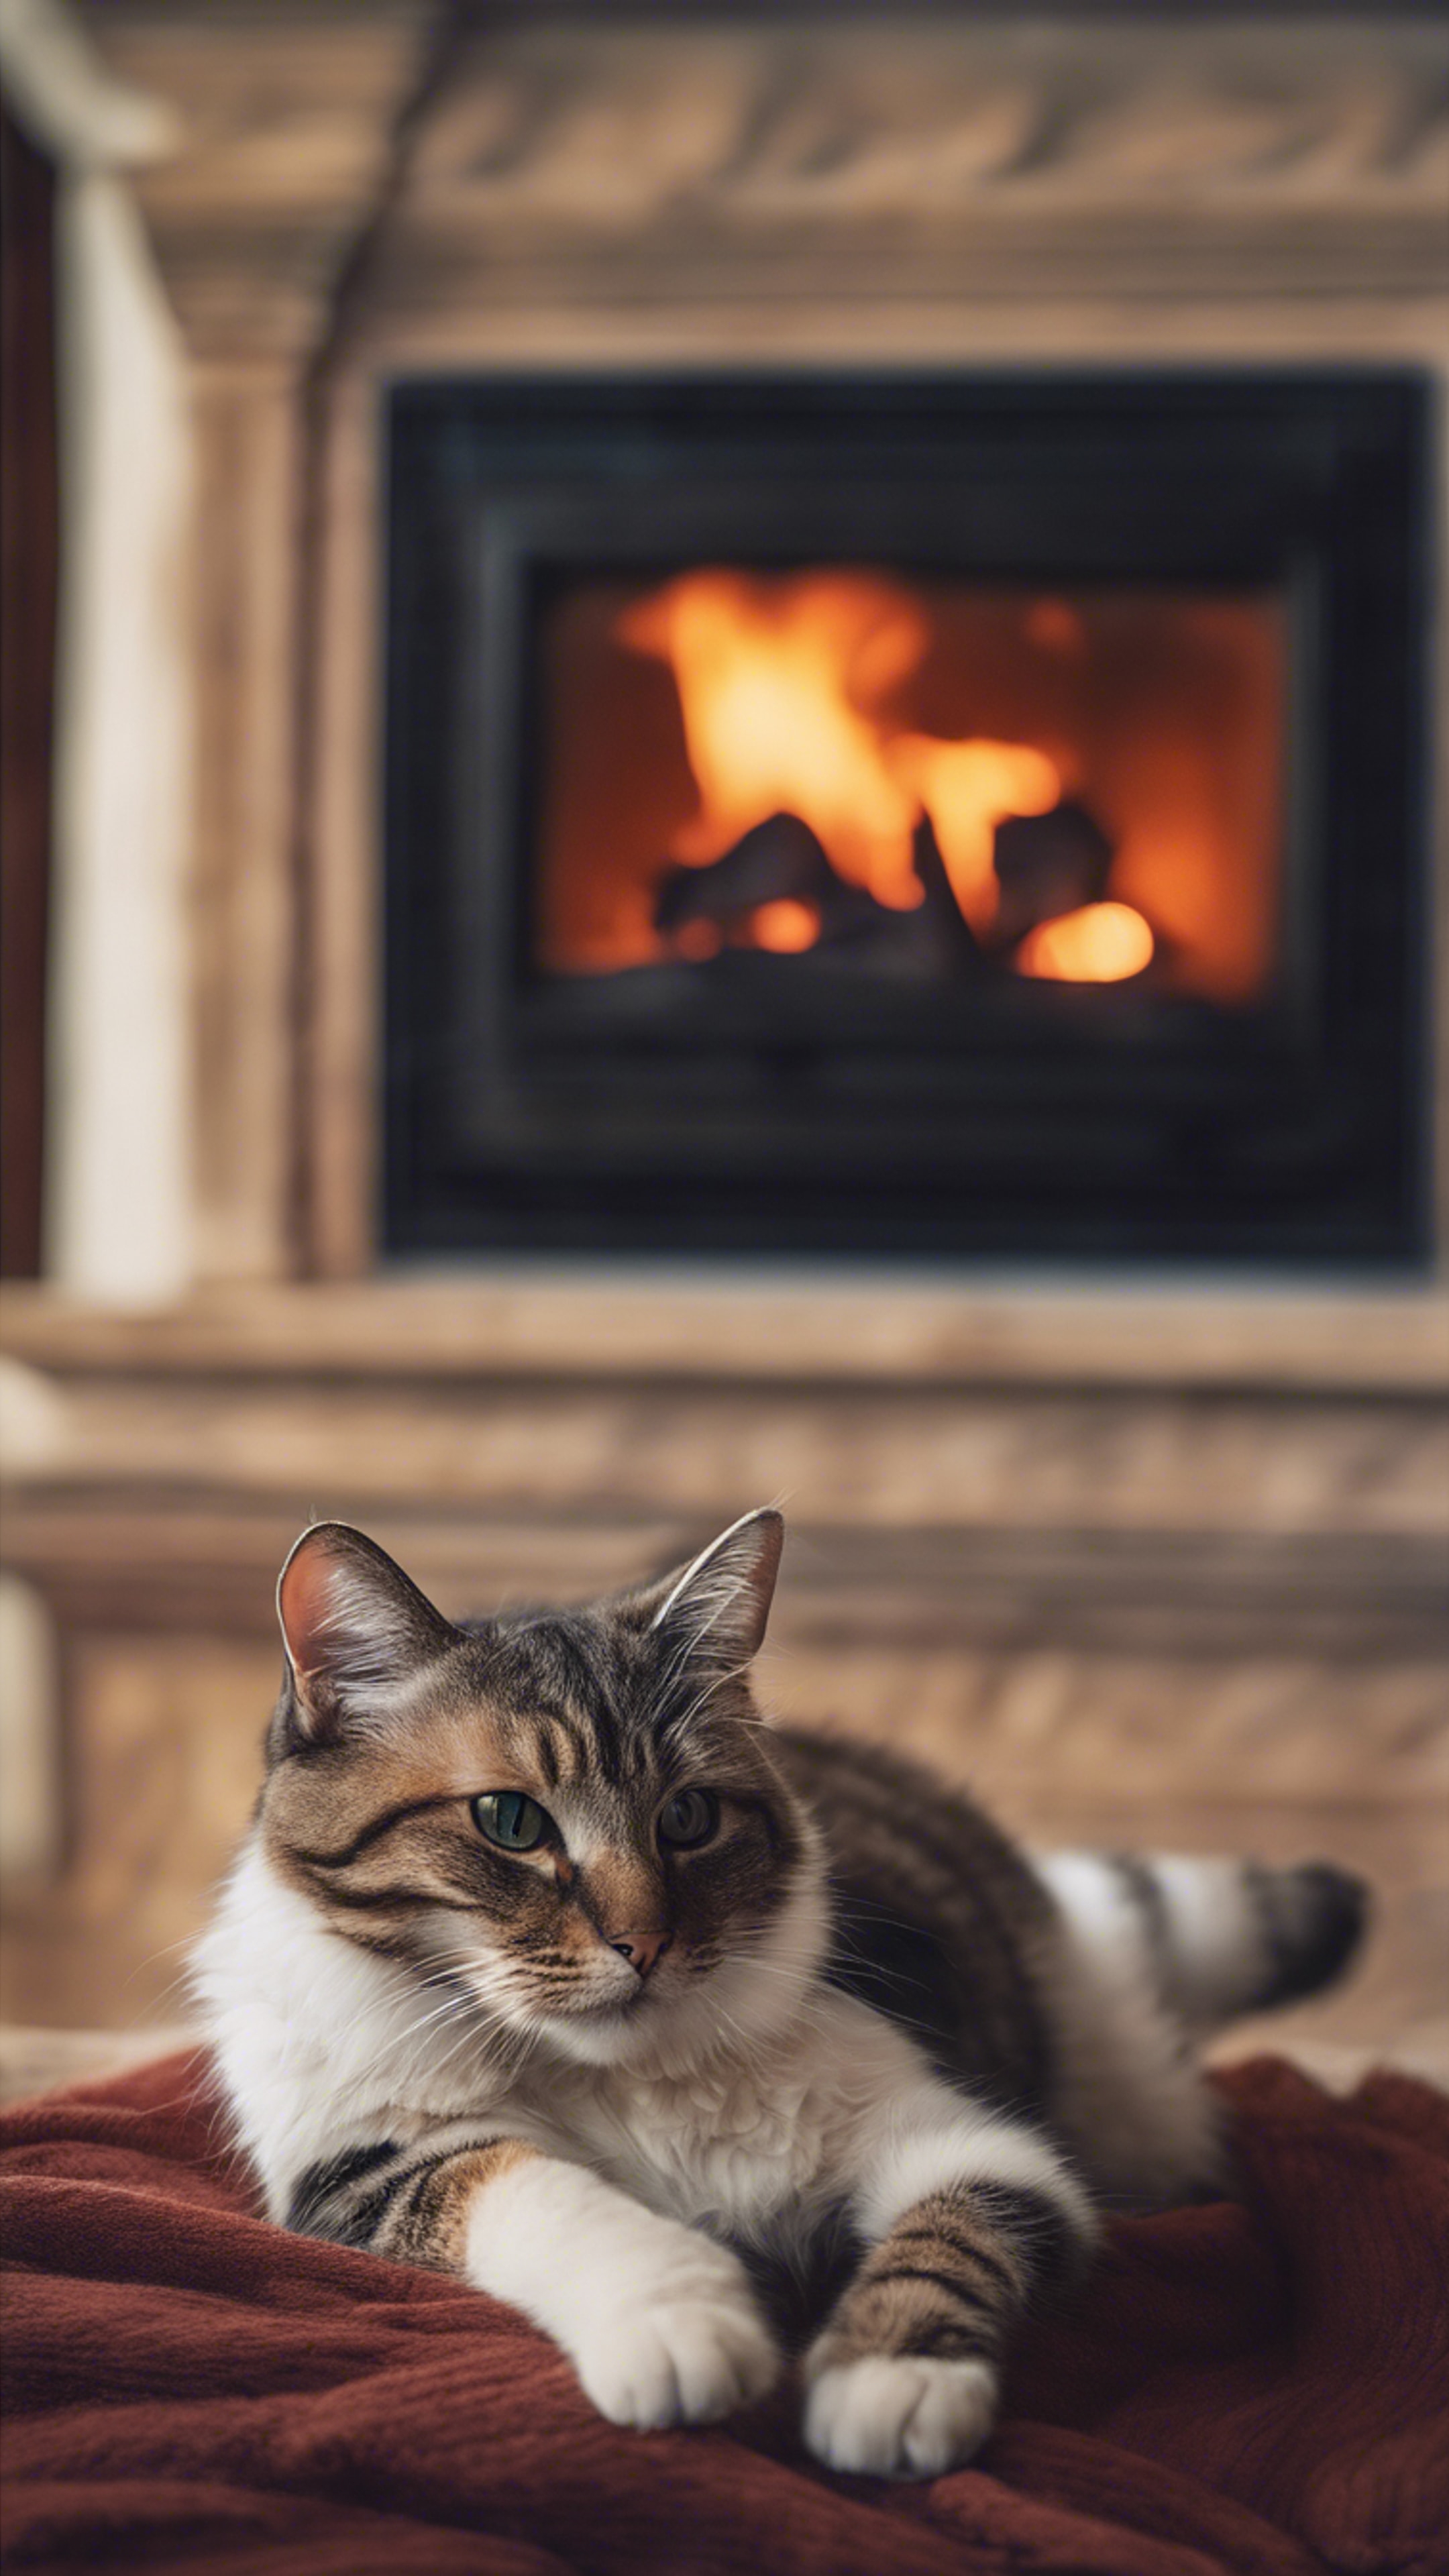 A cat lounging in front of a roaring fireplace, completely mesmerized by the flickering flames. Tapetai[f30d5ca7e04c497dade0]